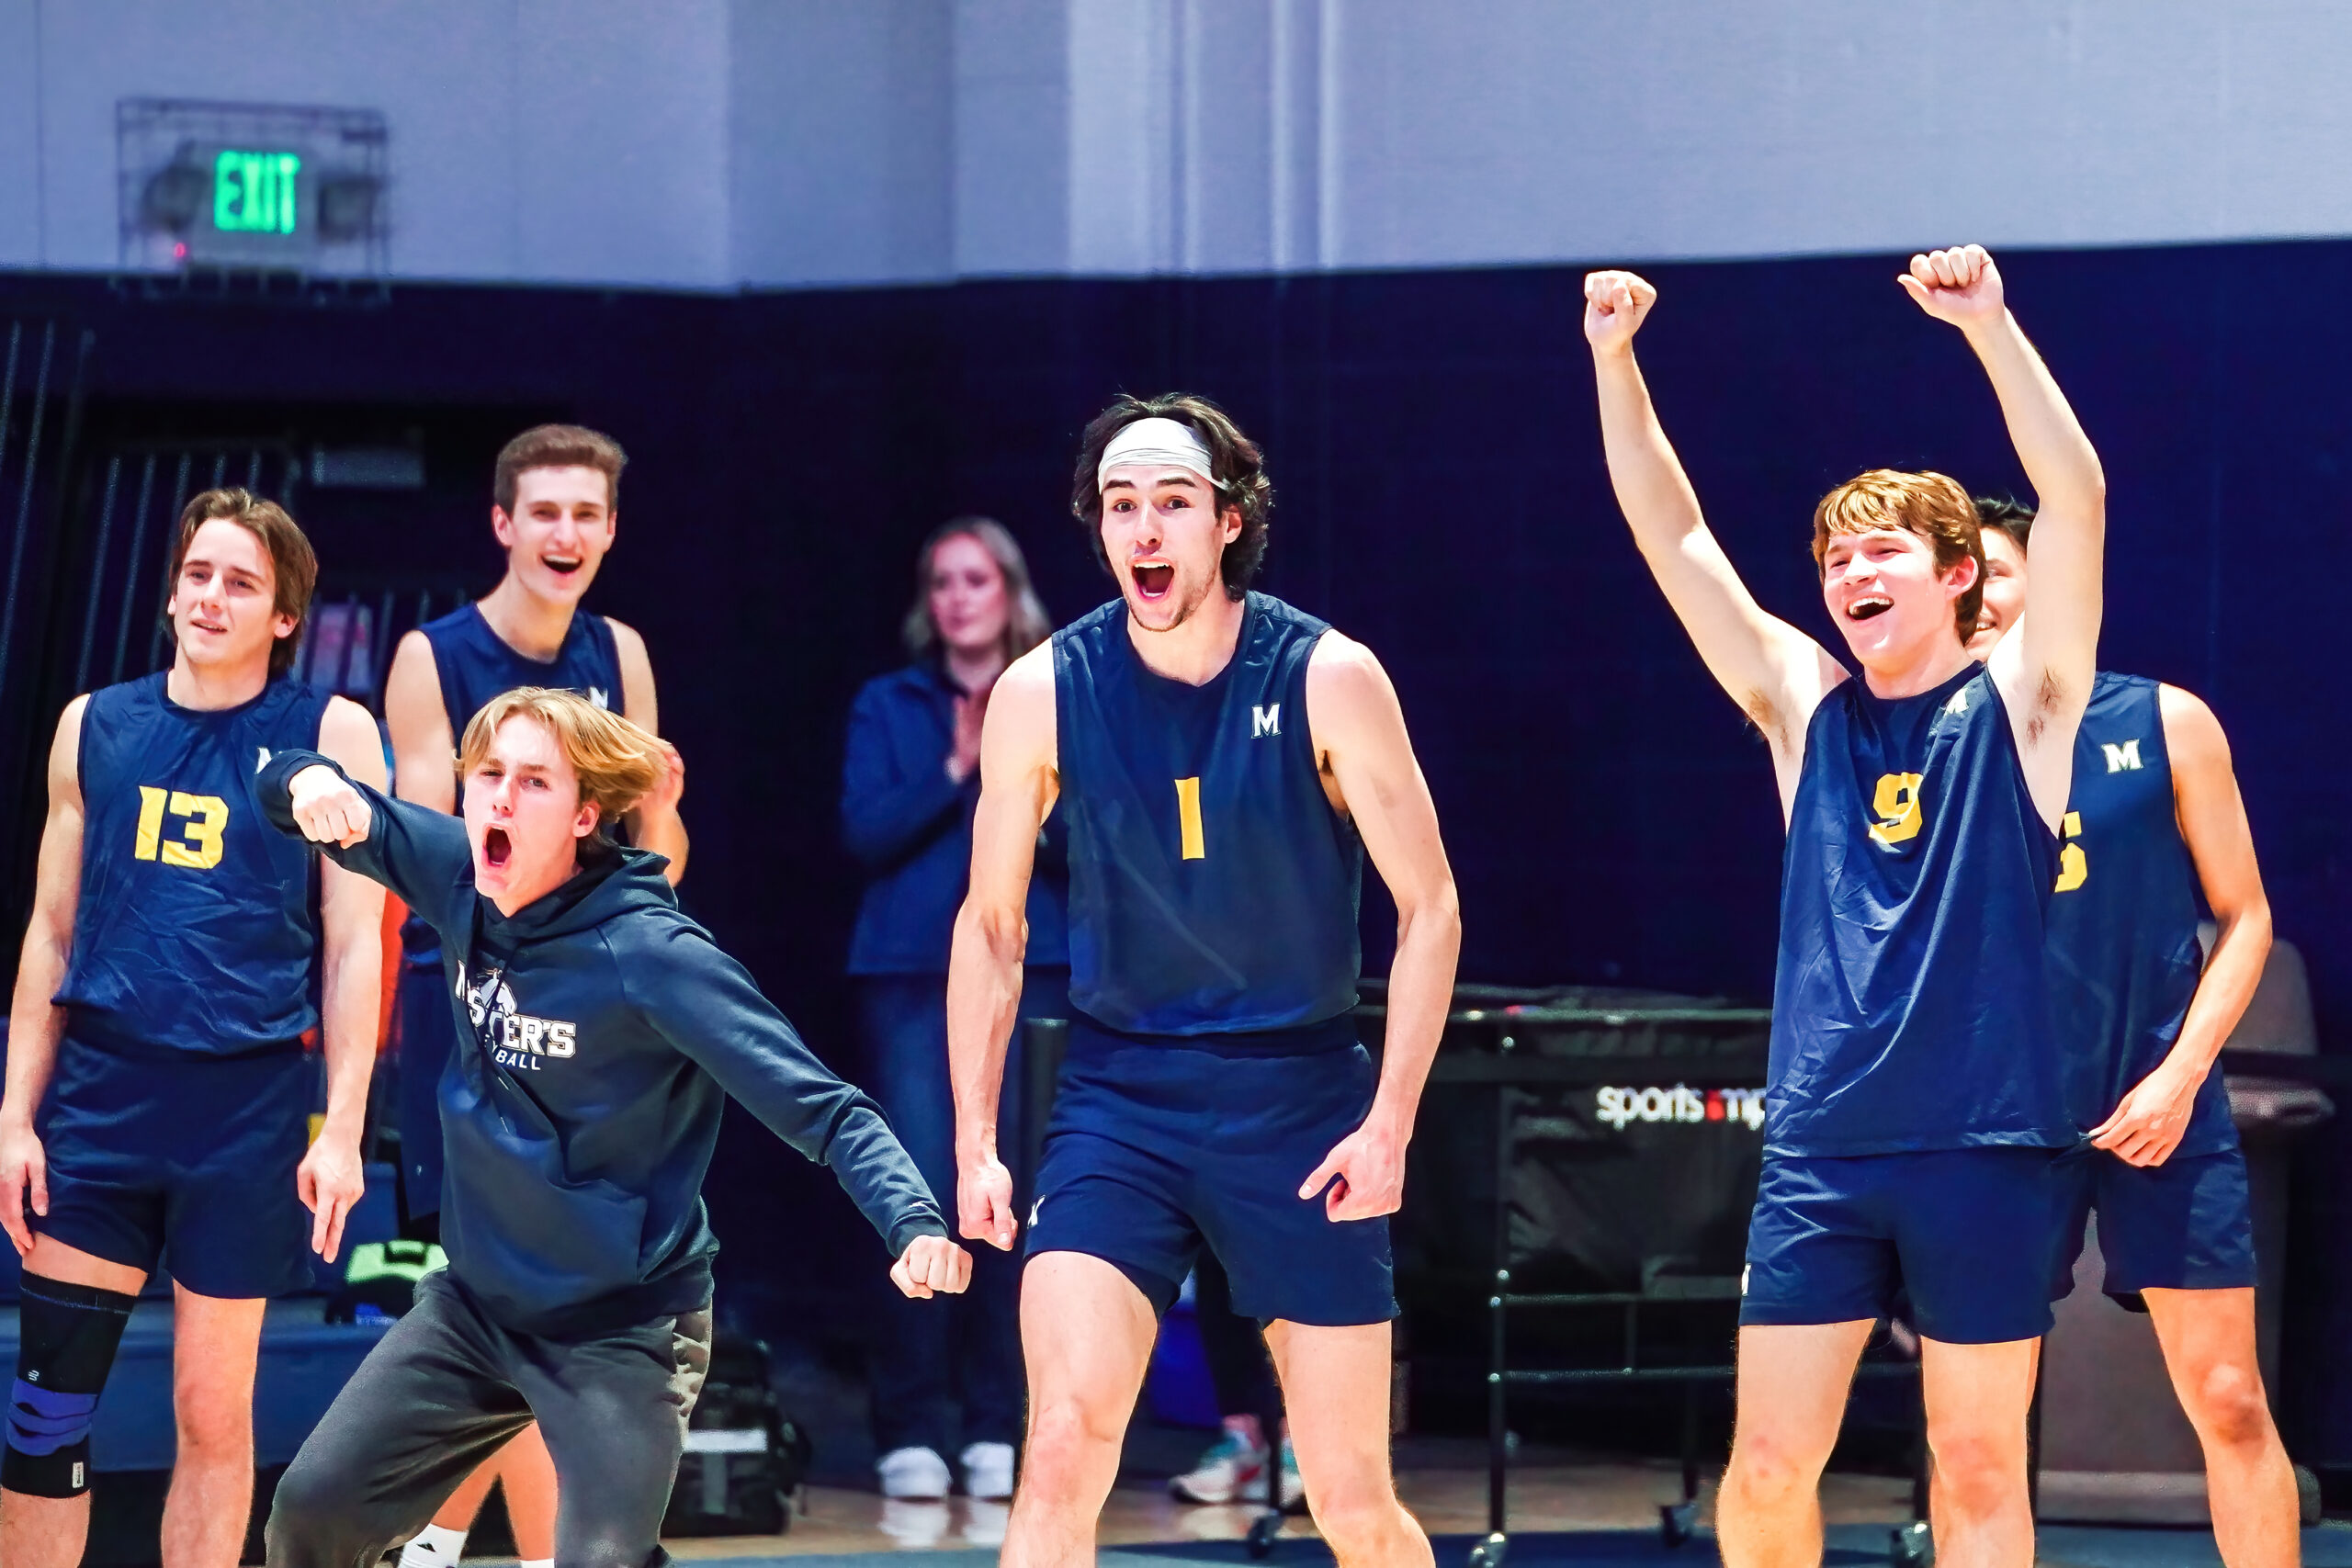 TMU Men’s Volleyball Earns NAIA No. 1 Ranking Featured Image